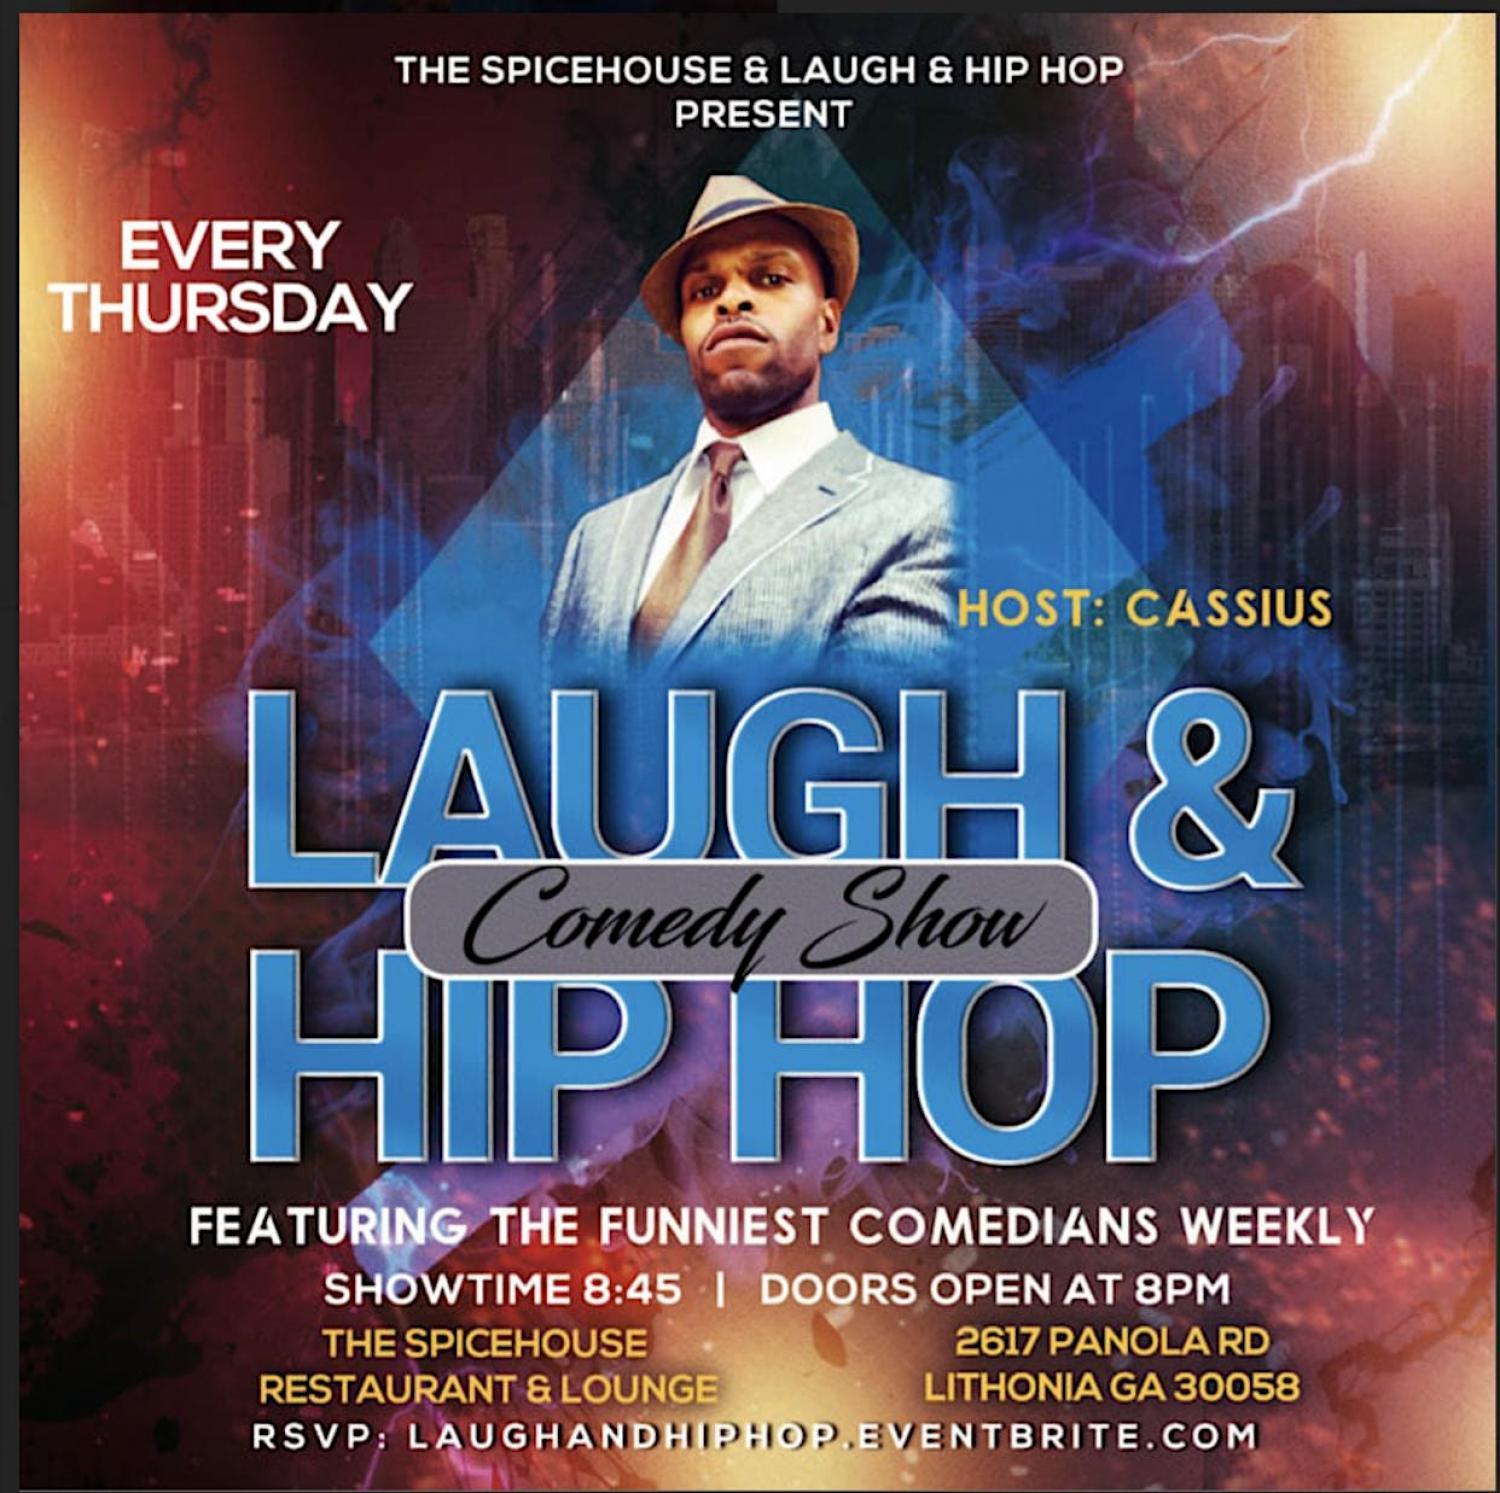 LAUGH & HIP HOP COMEDY SHOW at The Spicehouse * free
Thu Nov 24, 7:00 PM - Thu Nov 24, 10:00 PM
in 40 days